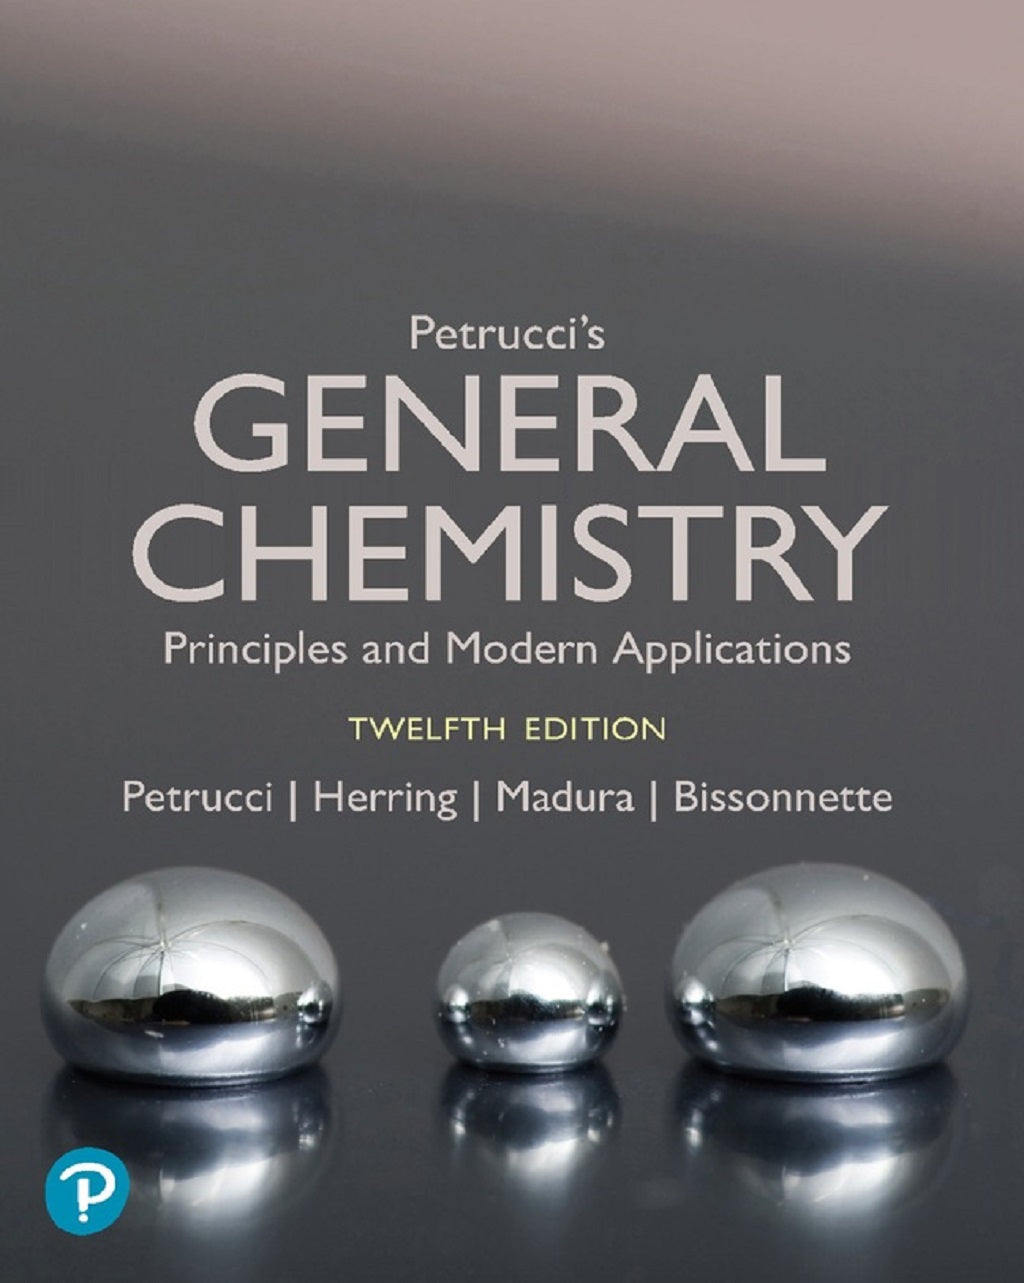 Mastering Chemistry for Petrucci, General Chemistry: Principles and Modern Applications 12th edition